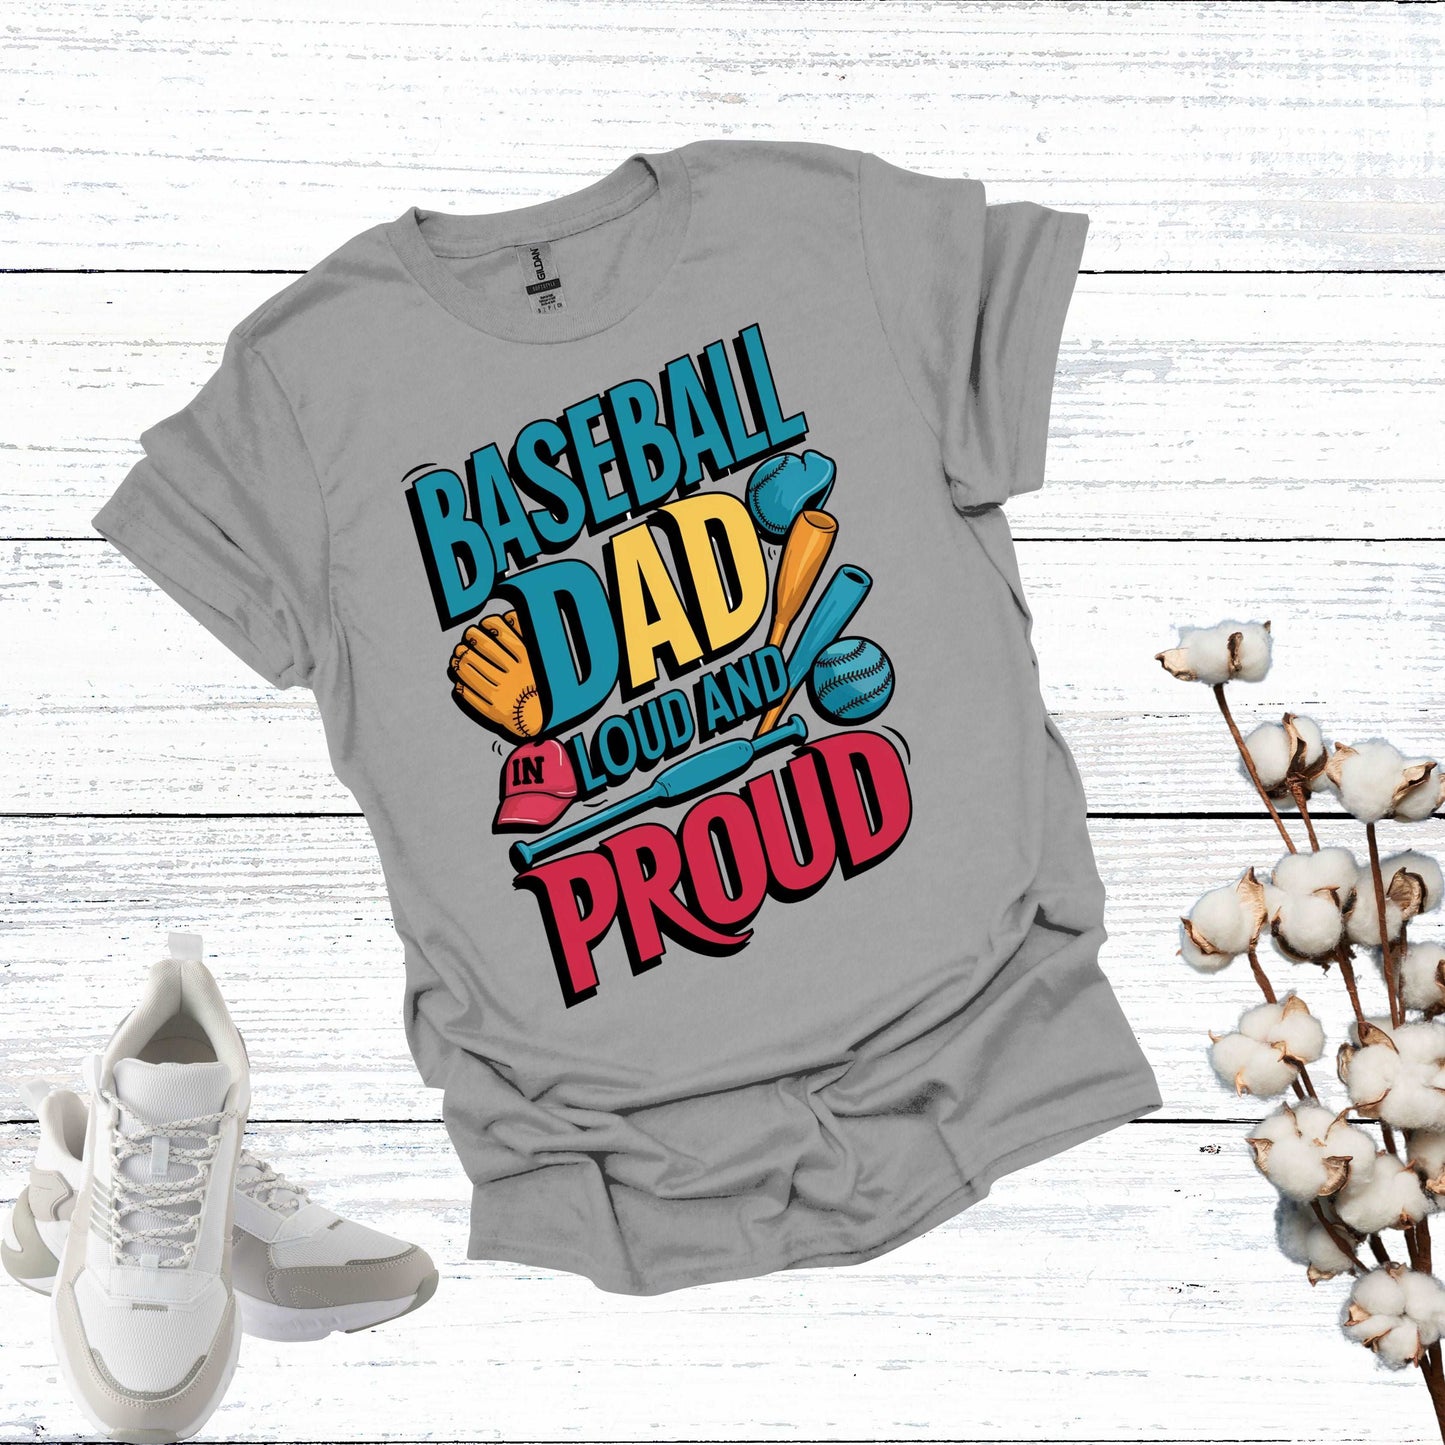 Baseball Dad Sport Grey Shirt - Fathers are Loud and Proud